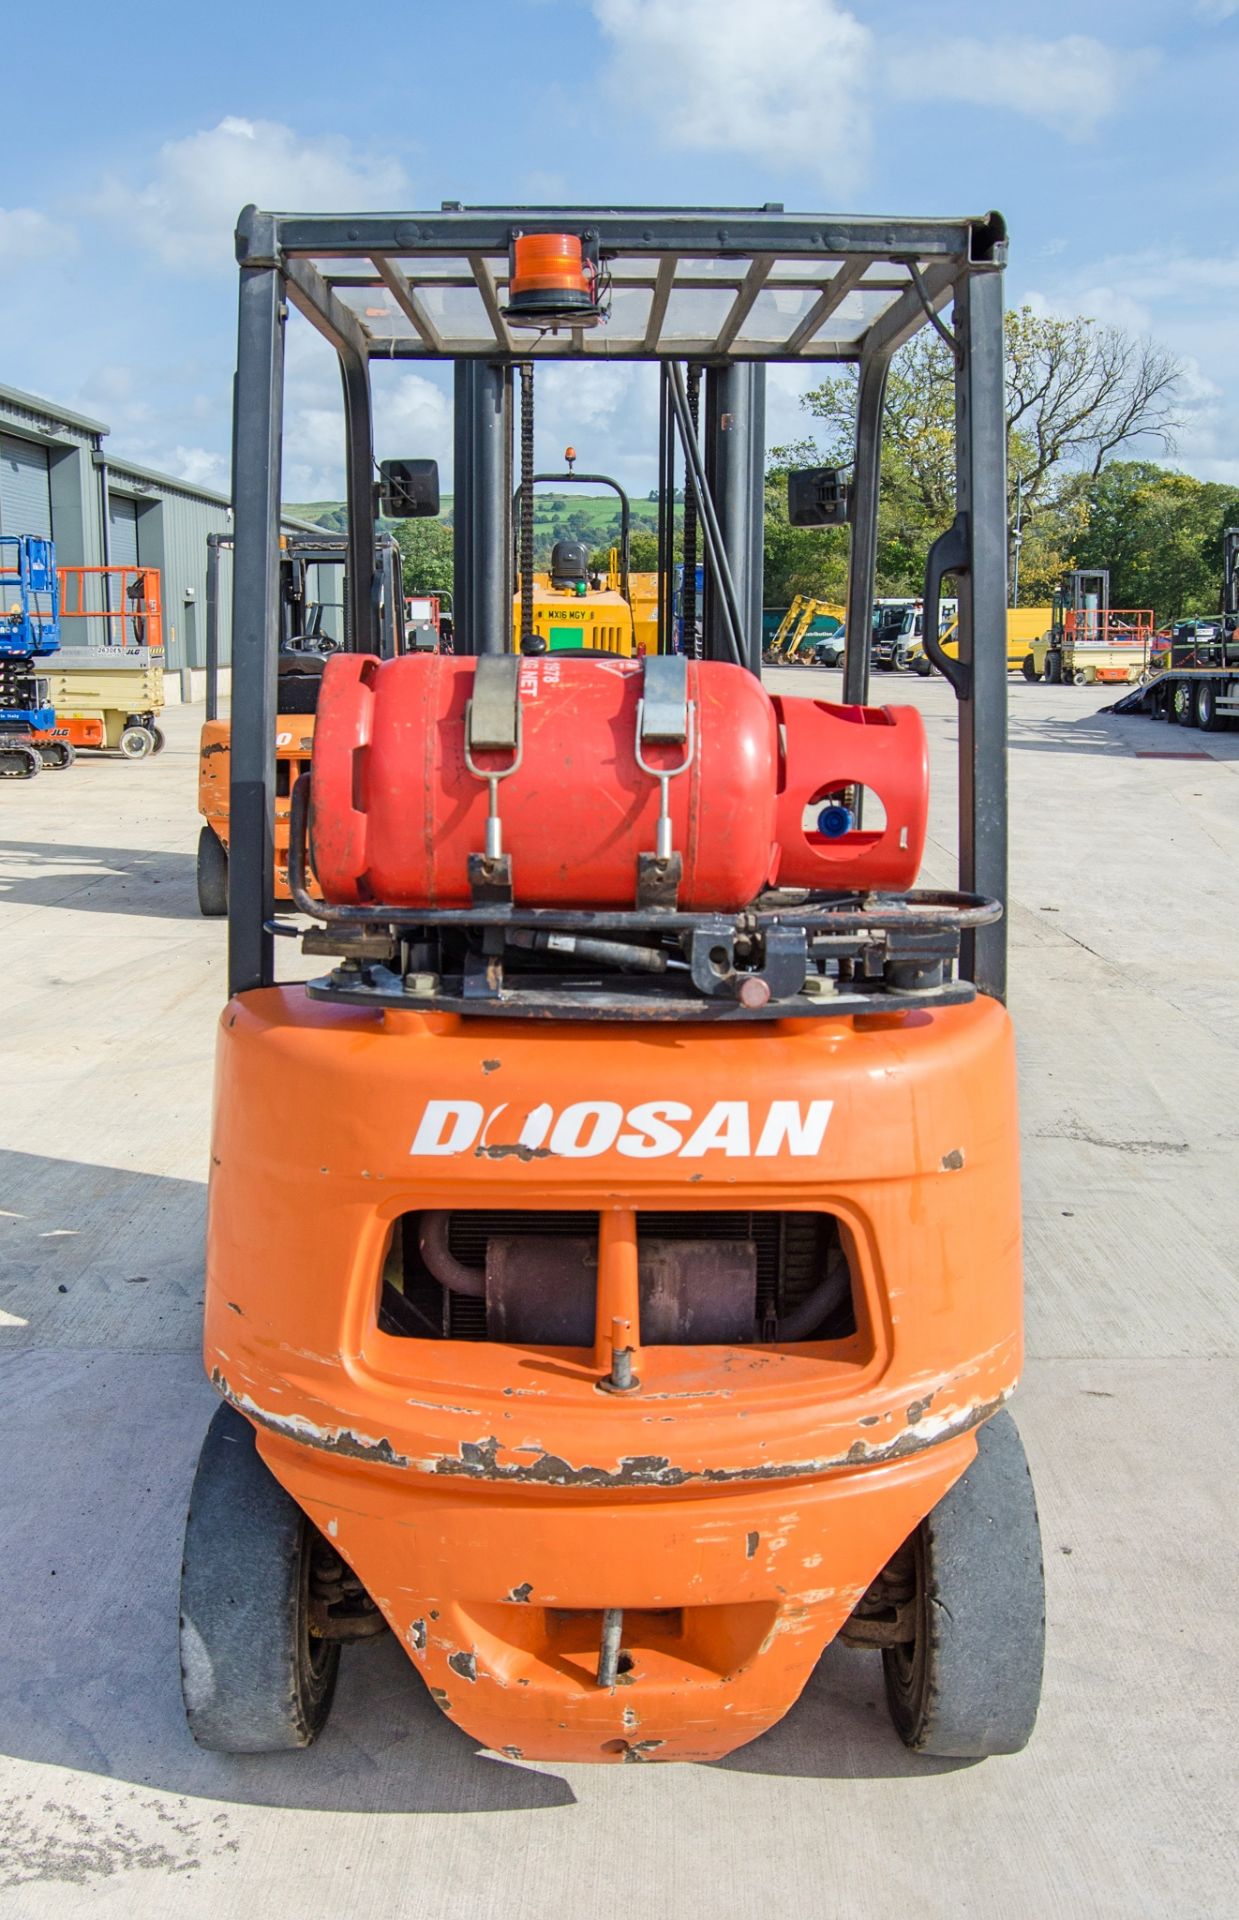 Doosan G20E-5 2 tonne gas powered fork lift truck Year: 2008 S/N: MF00471 Recorded Hours: 8276 - Image 6 of 22